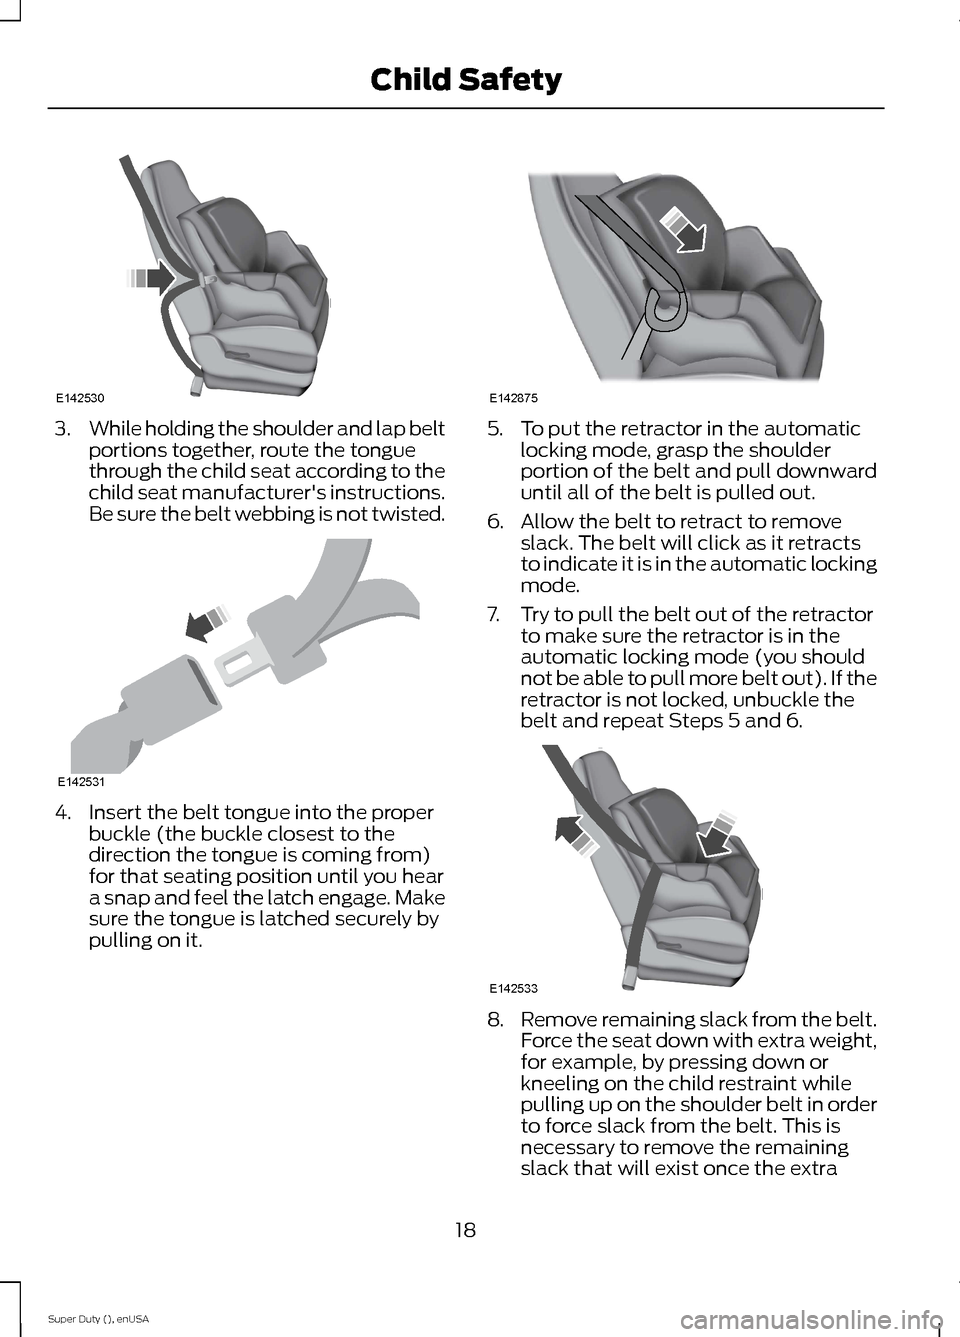 FORD SUPER DUTY 2015 3.G Owners Manual 3.While holding the shoulder and lap beltportions together, route the tonguethrough the child seat according to thechild seat manufacturers instructions.Be sure the belt webbing is not twisted.
4.Ins